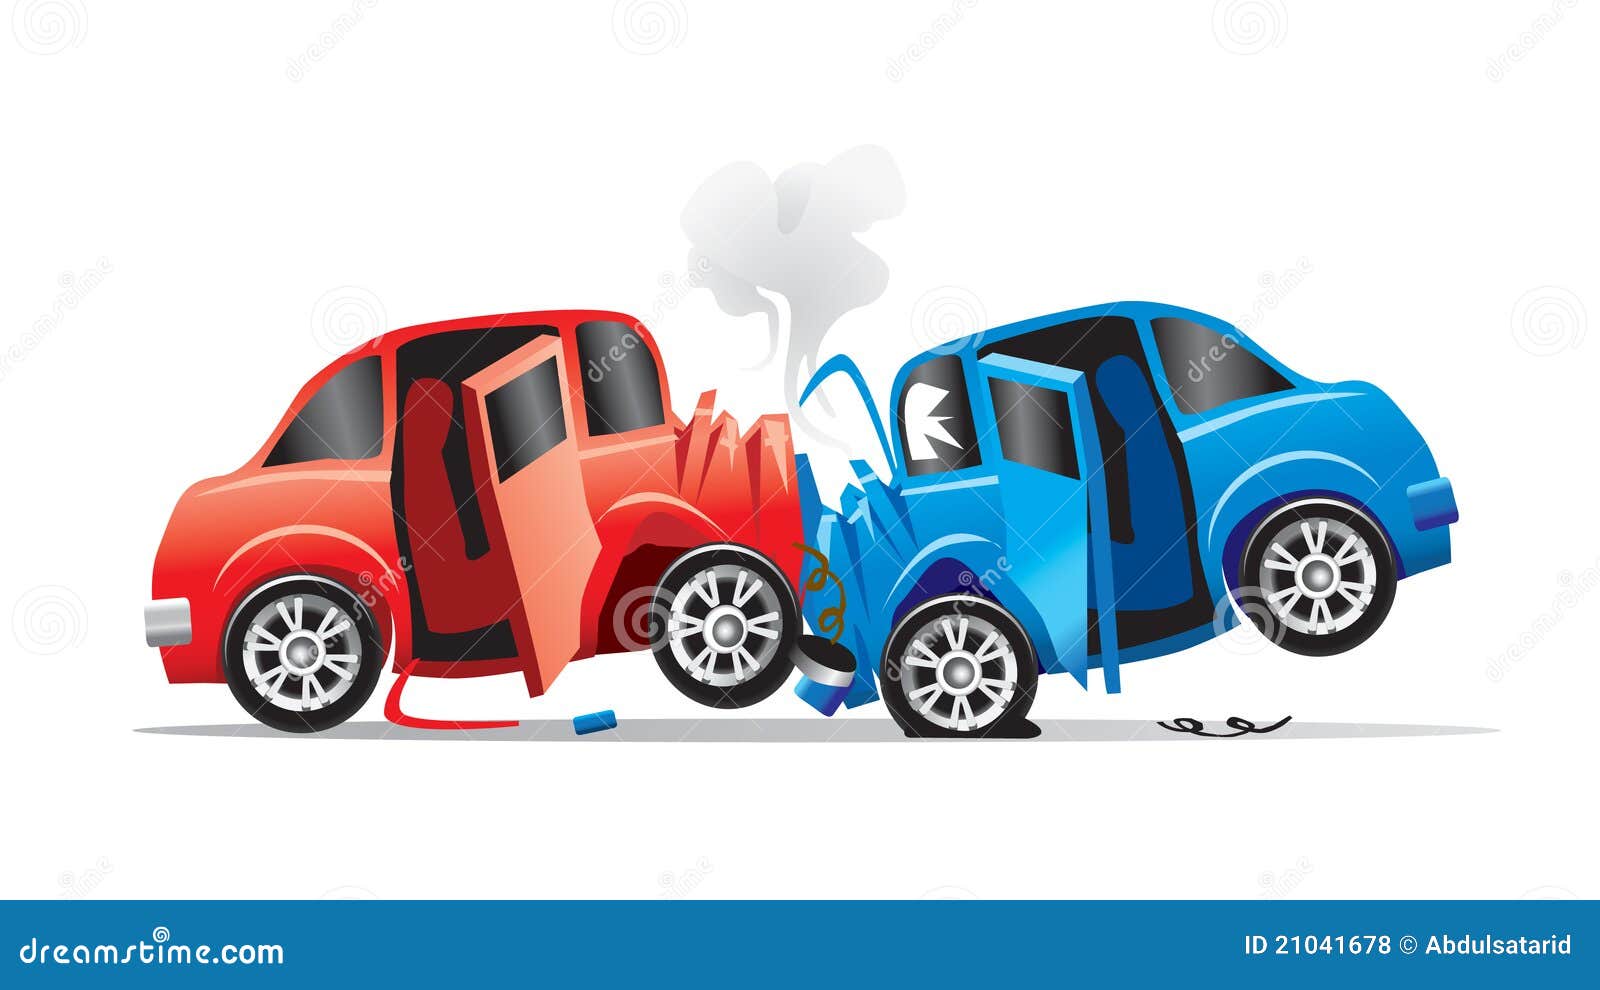 Drawing of two vehicles in a headon collision or accident.